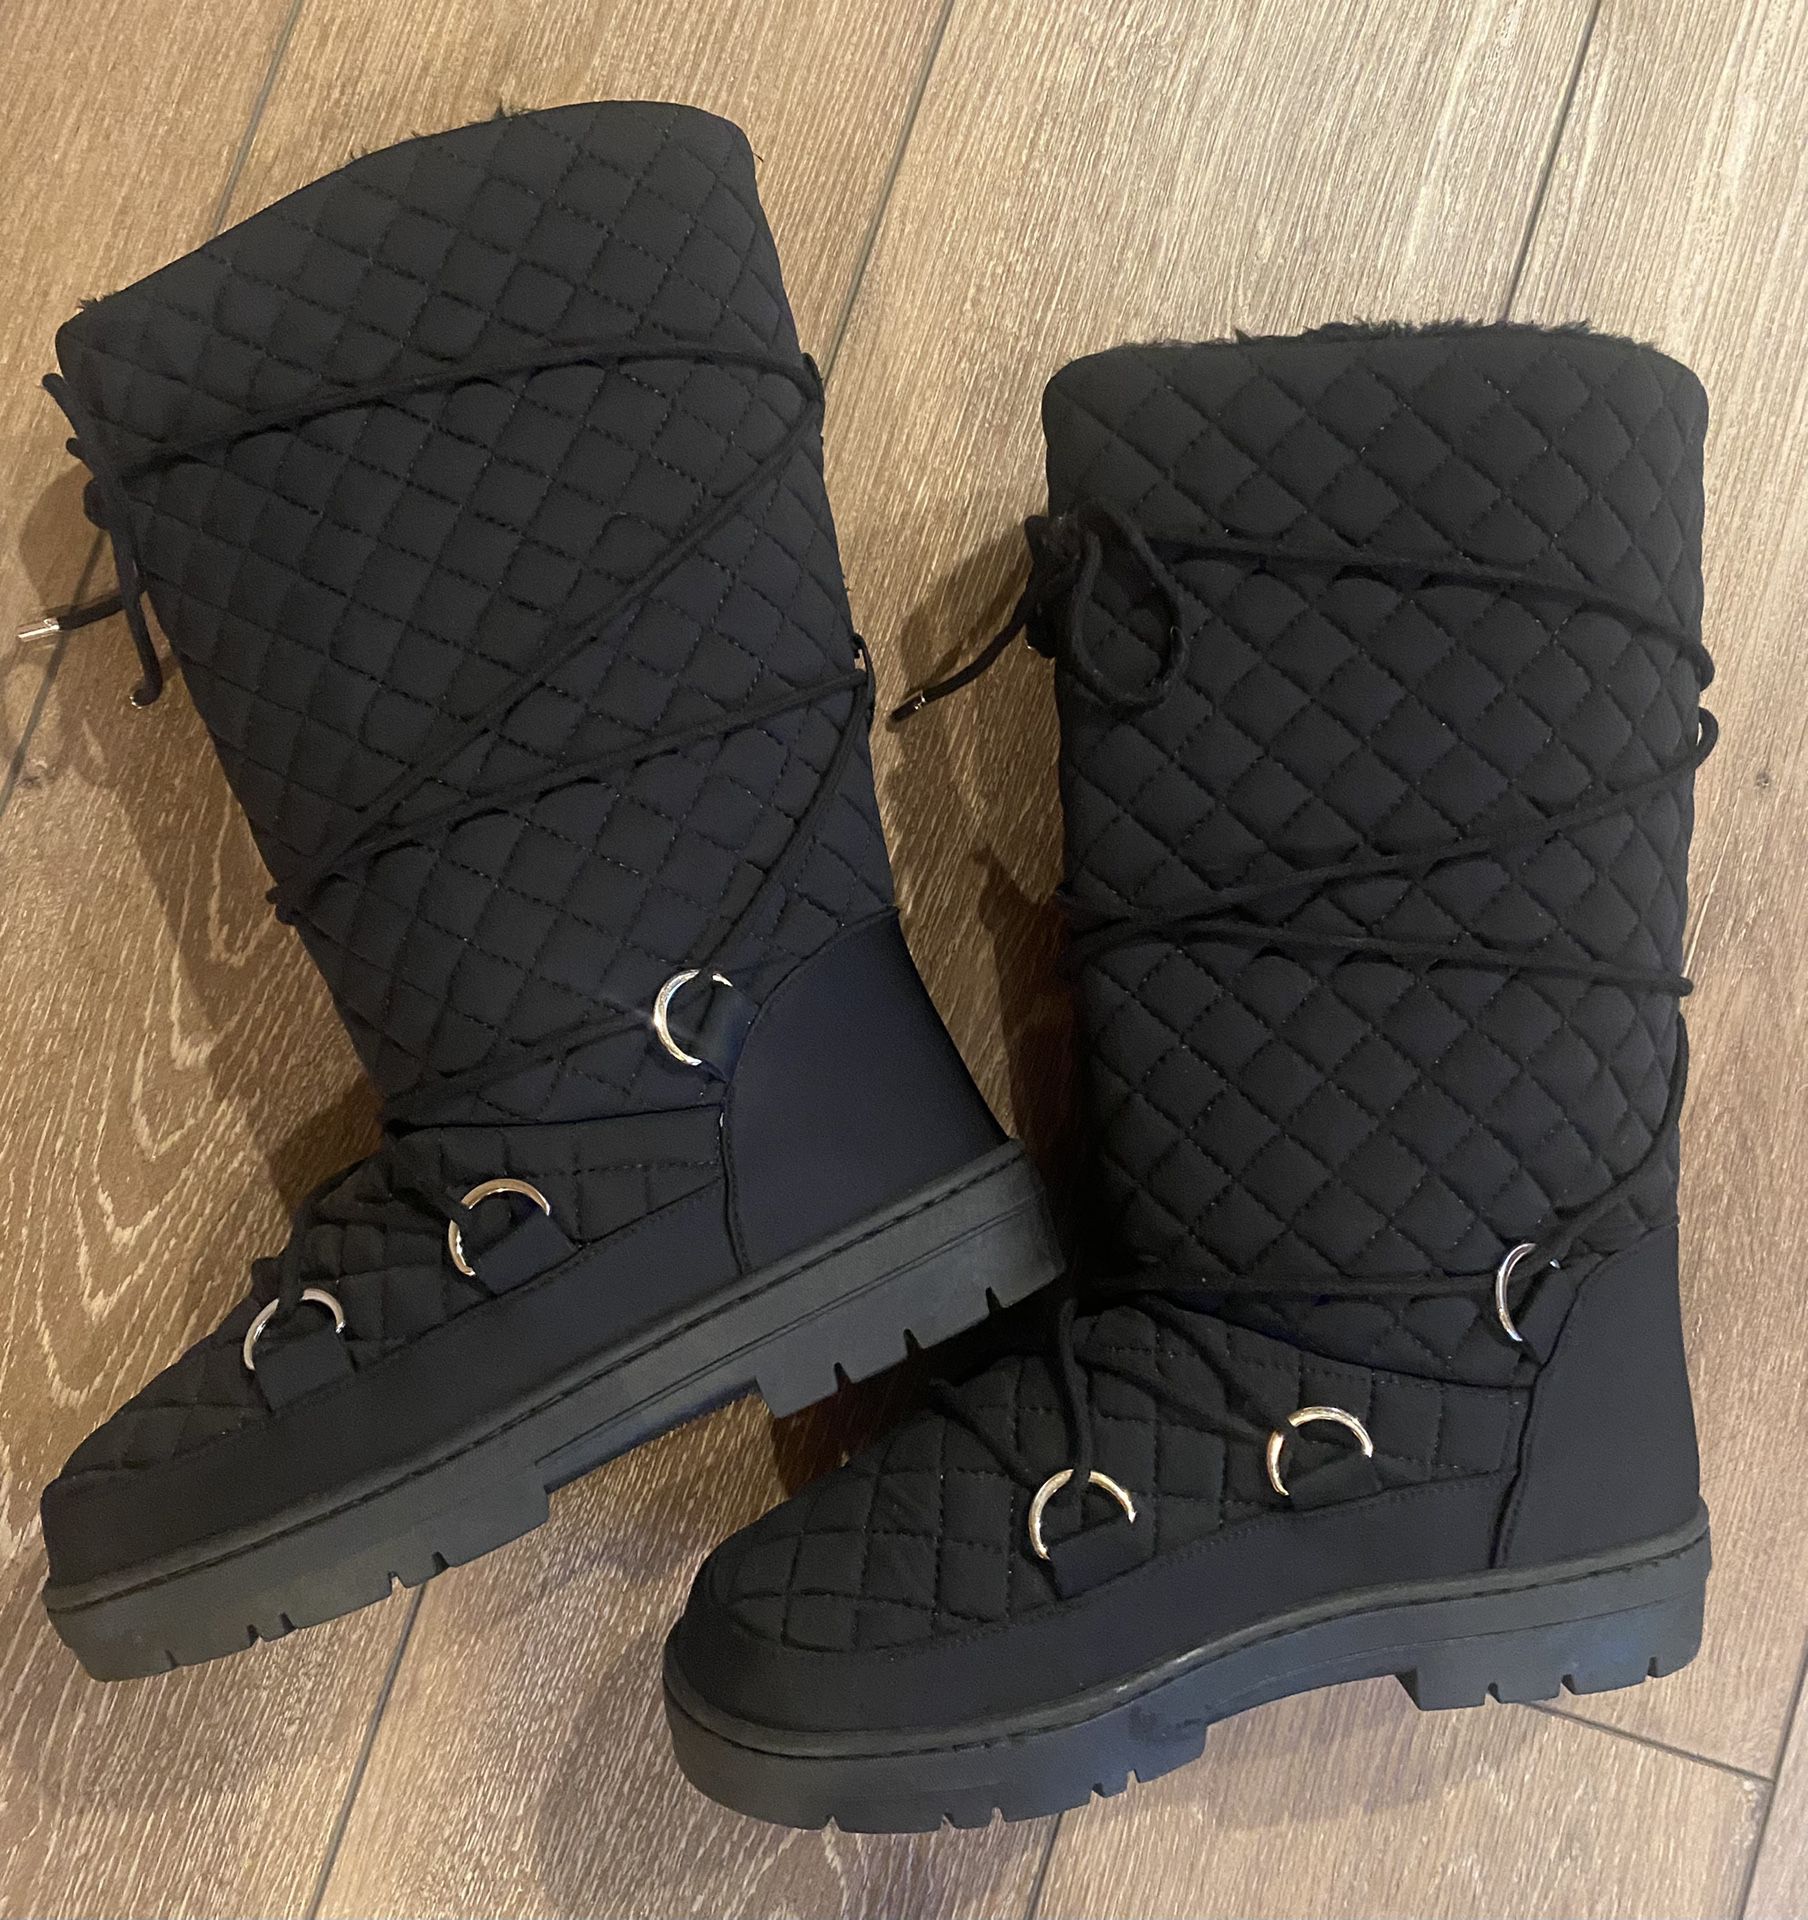 BRAND NEW SIZE 7 WINTER BOOTS QUILTED WITH FUR LINING 